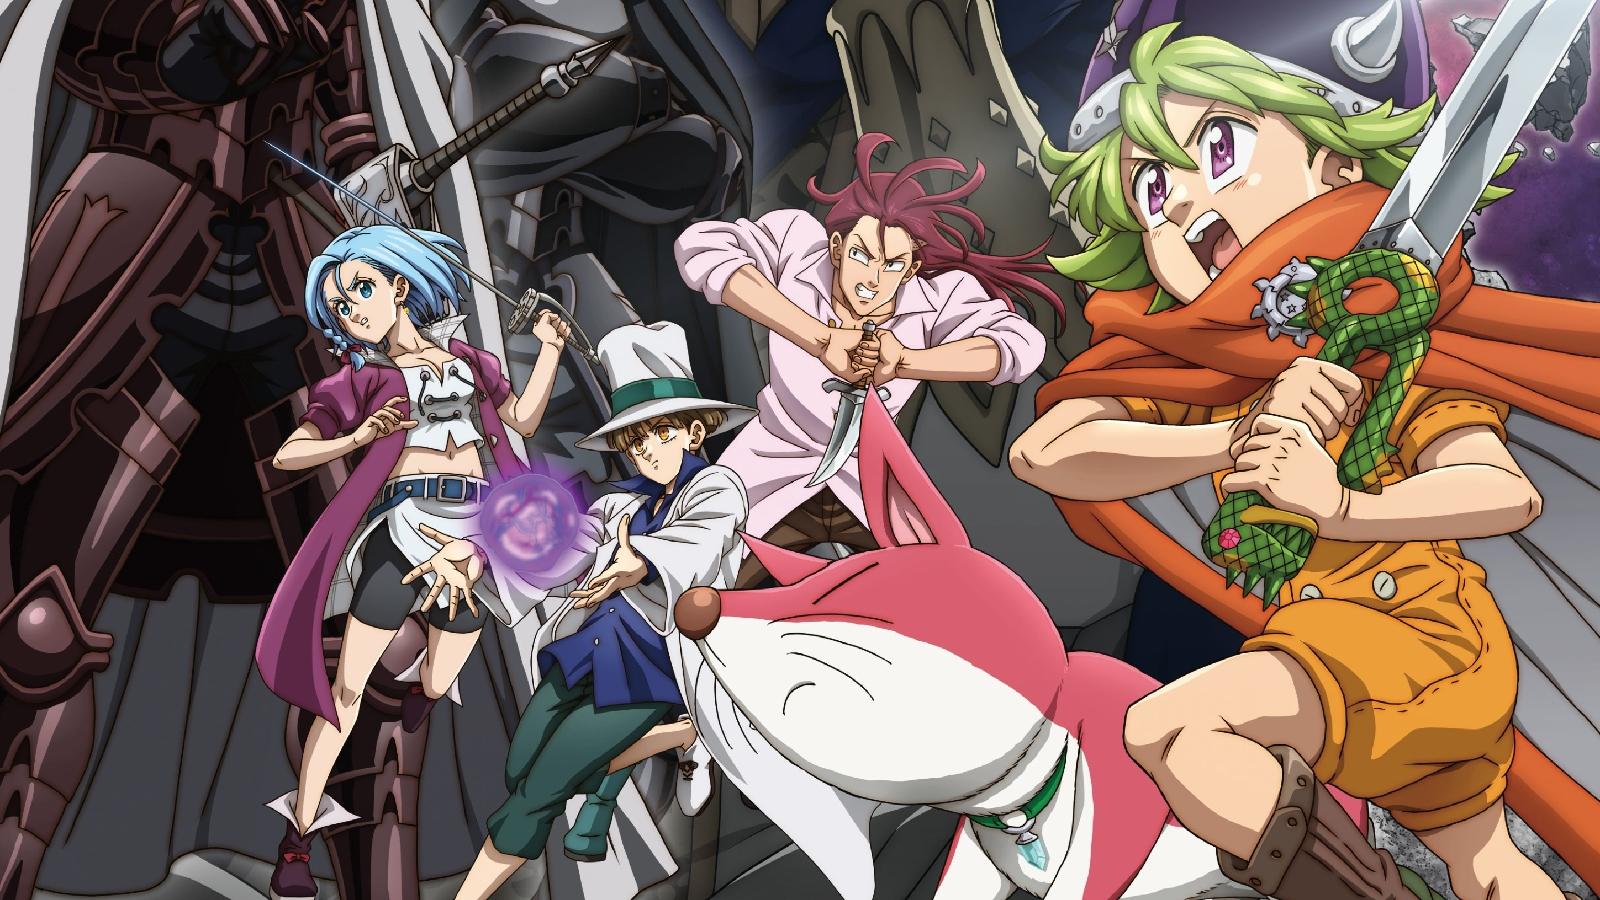 The Seven Deadly Sins: Four Knights of the Apocalypse Anime